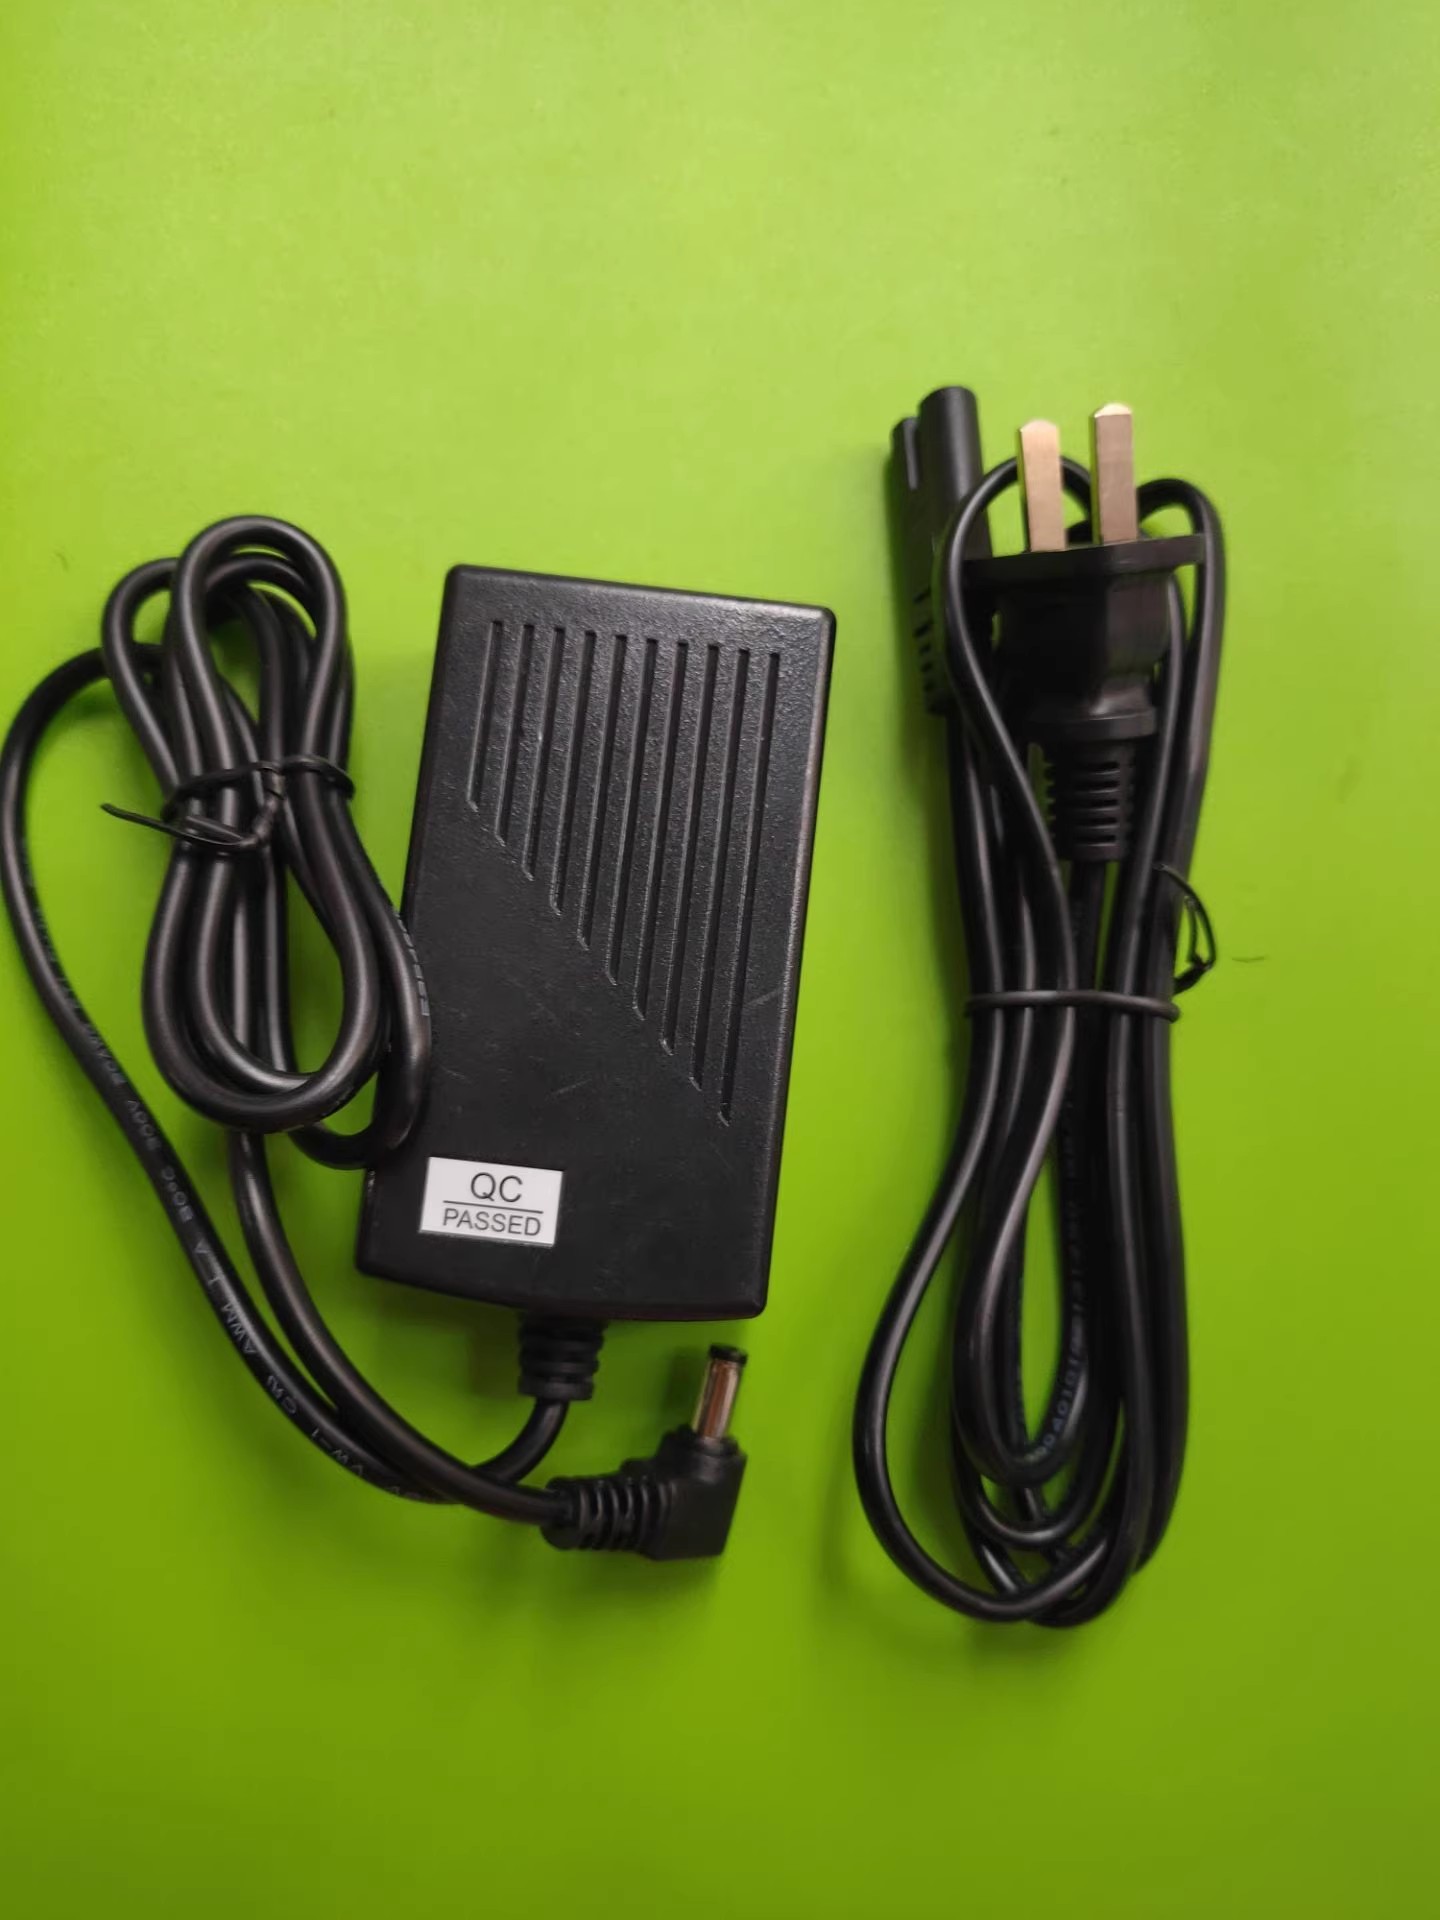 *Brand NEW*CASIO 9V 850MA AC DC ADAPTHE 9850B AD-5CL CT-360 588 670 POWER Supply - Click Image to Close